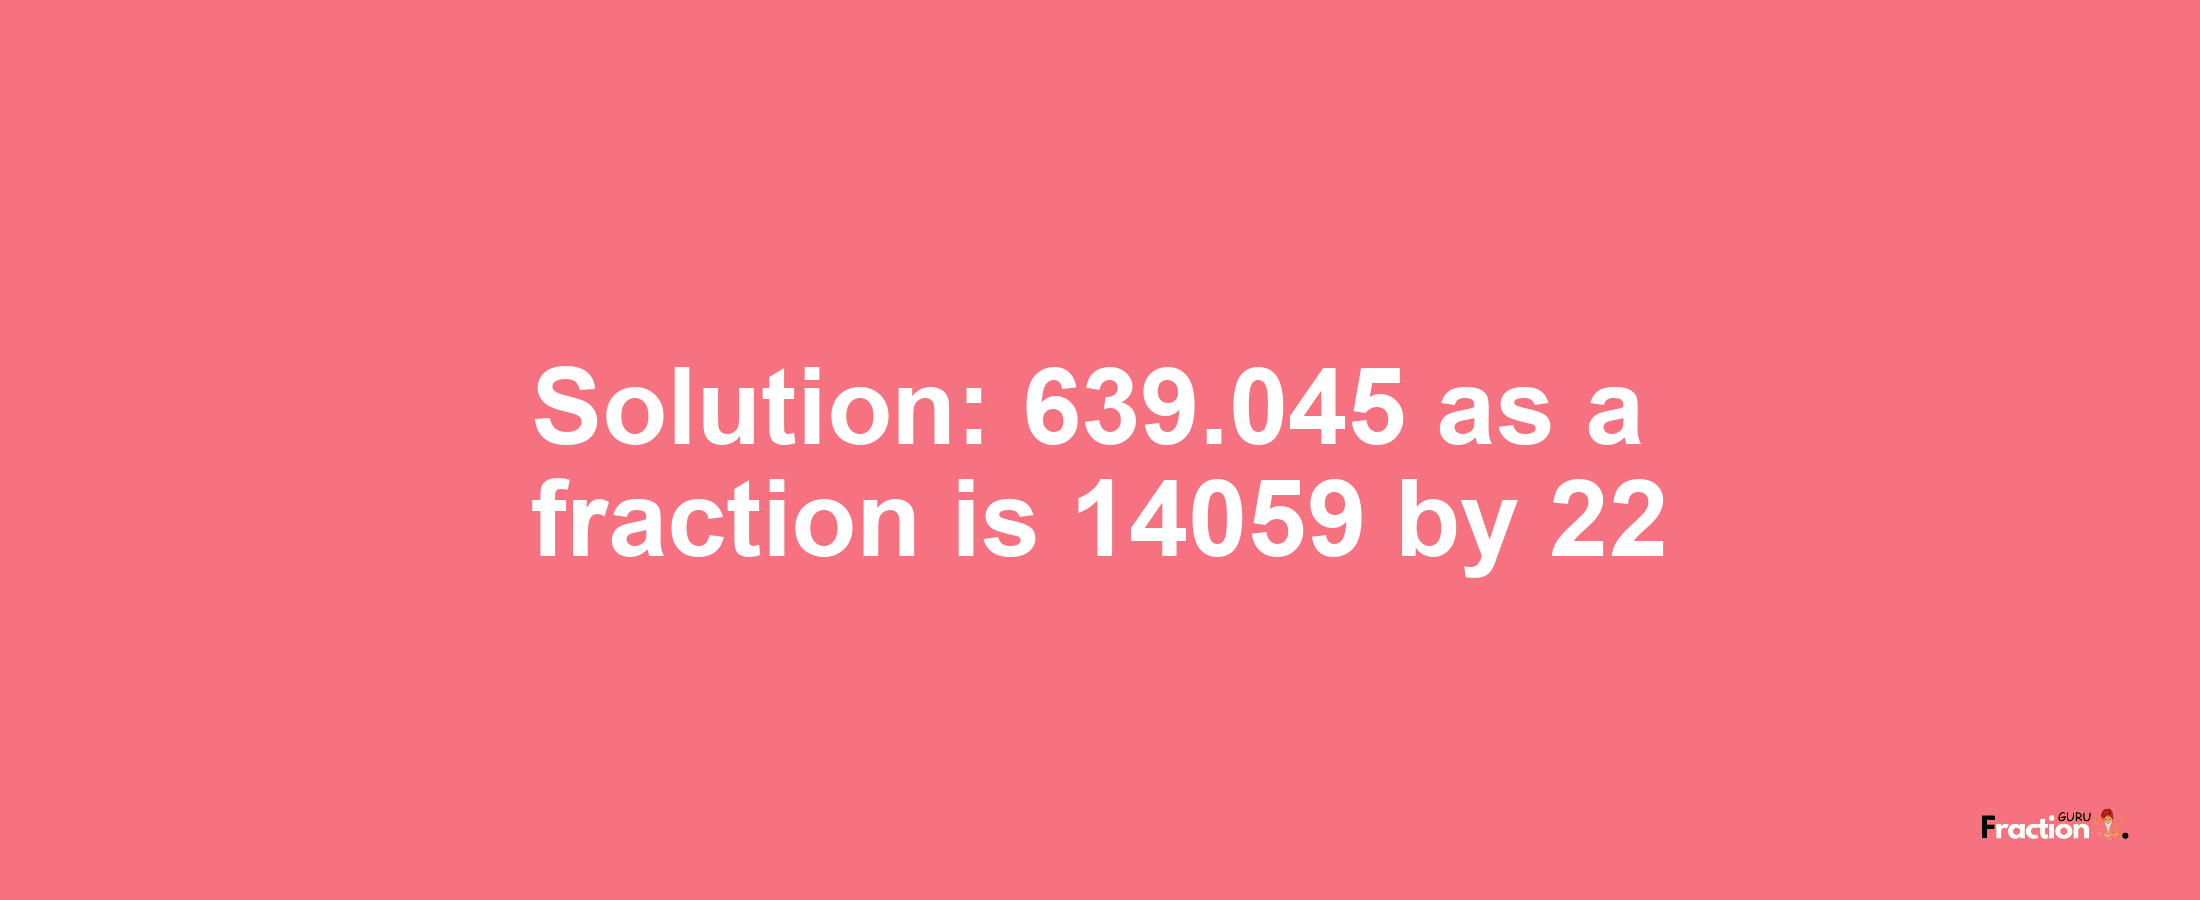 Solution:639.045 as a fraction is 14059/22